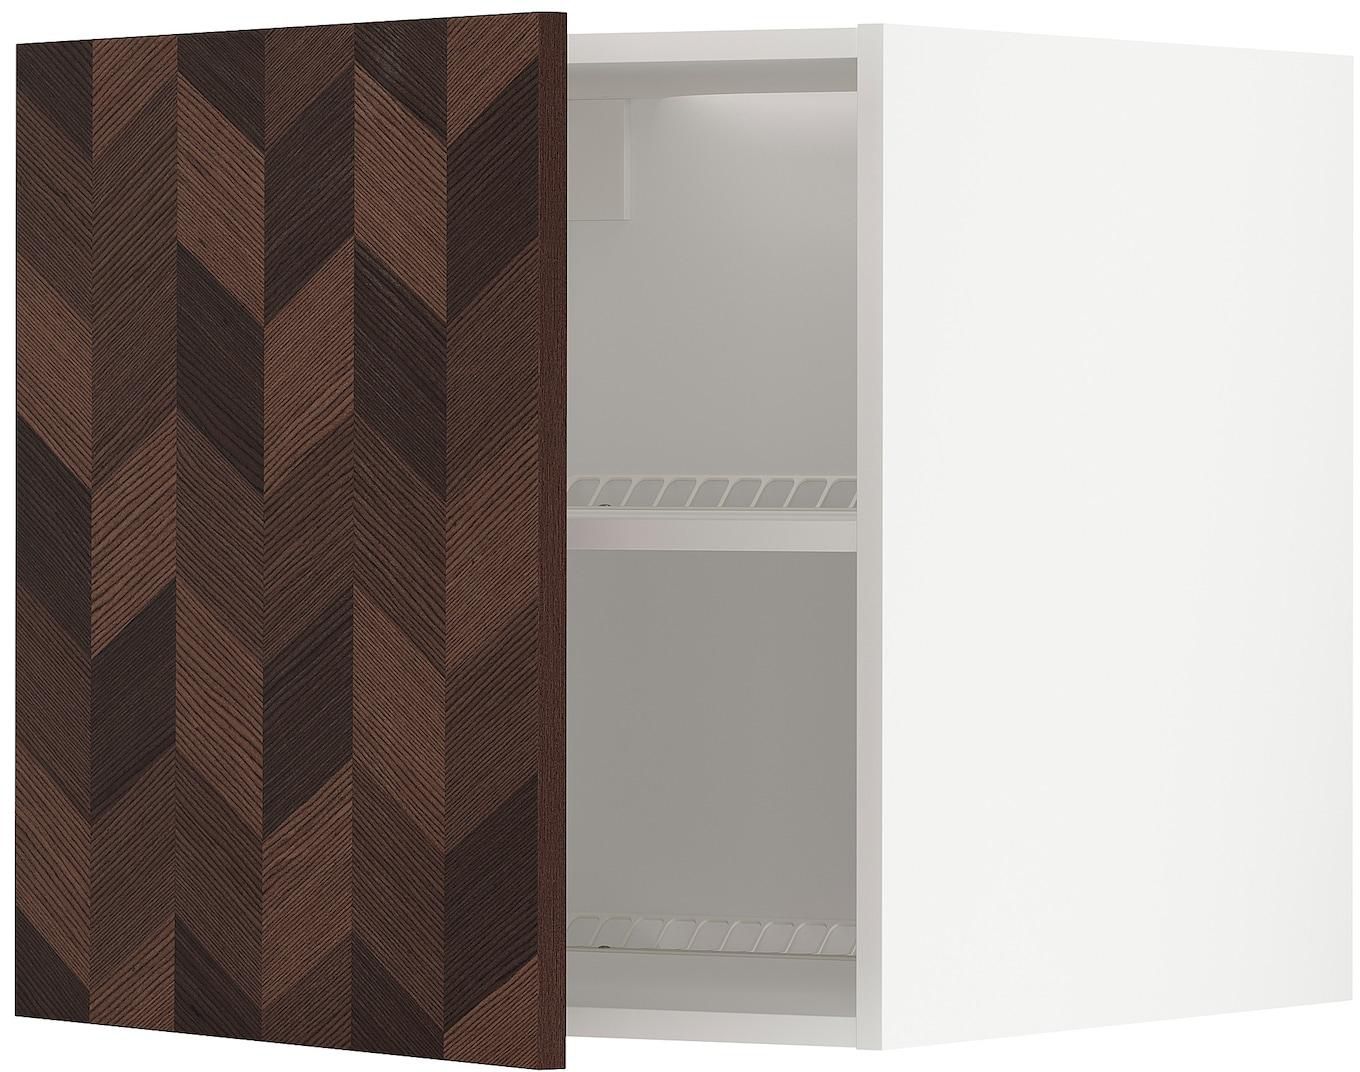 METOD Top cabinet for fridge/freezer - white Hasslarp/brown patterned 60x60 cm